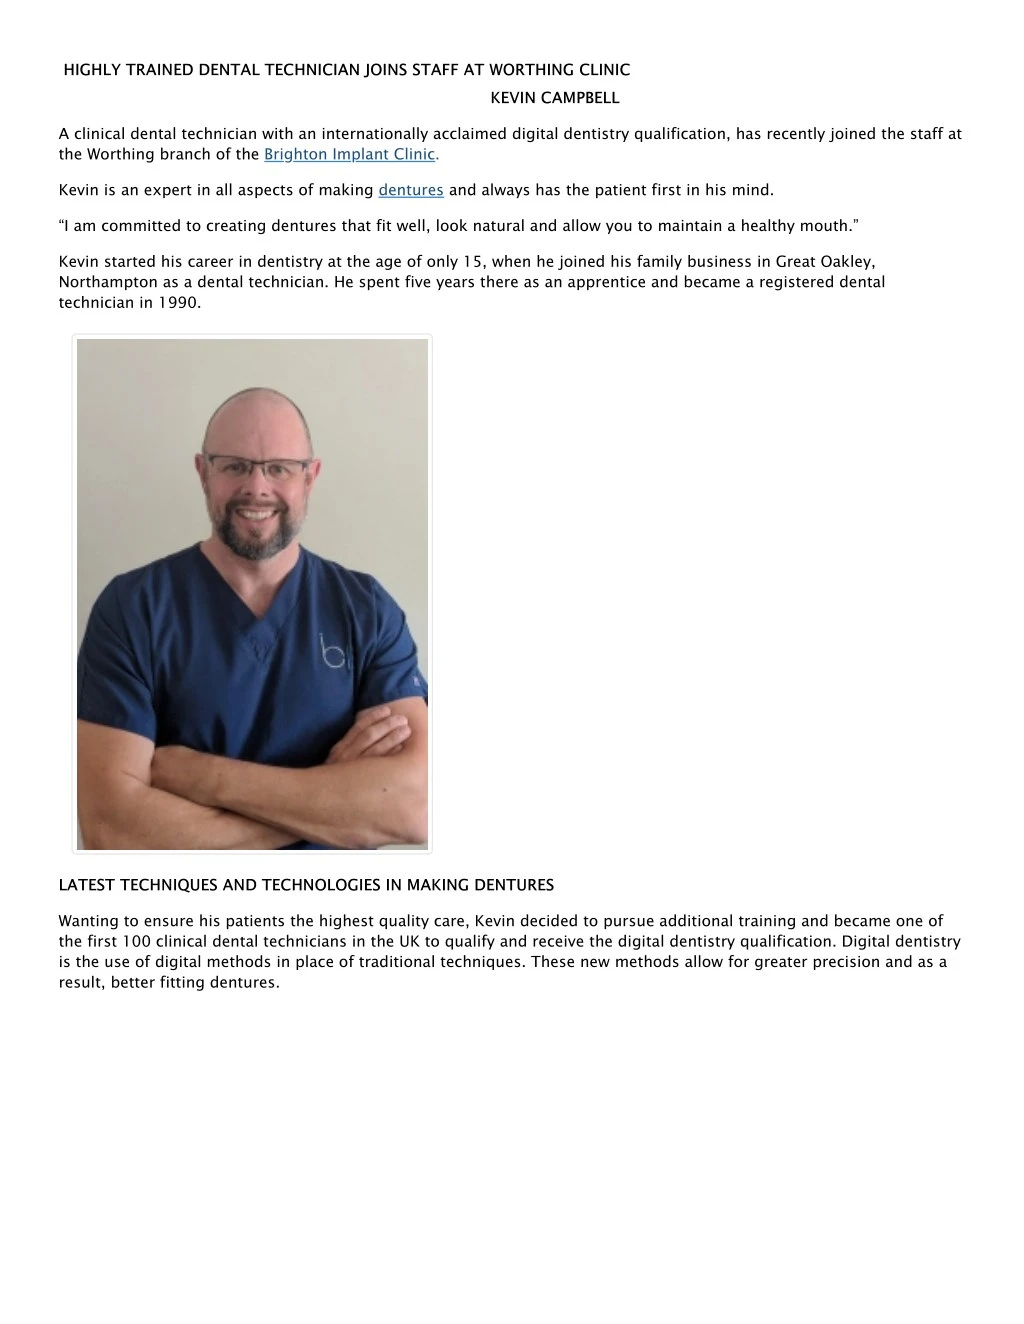 highly trained dental technician joins staff